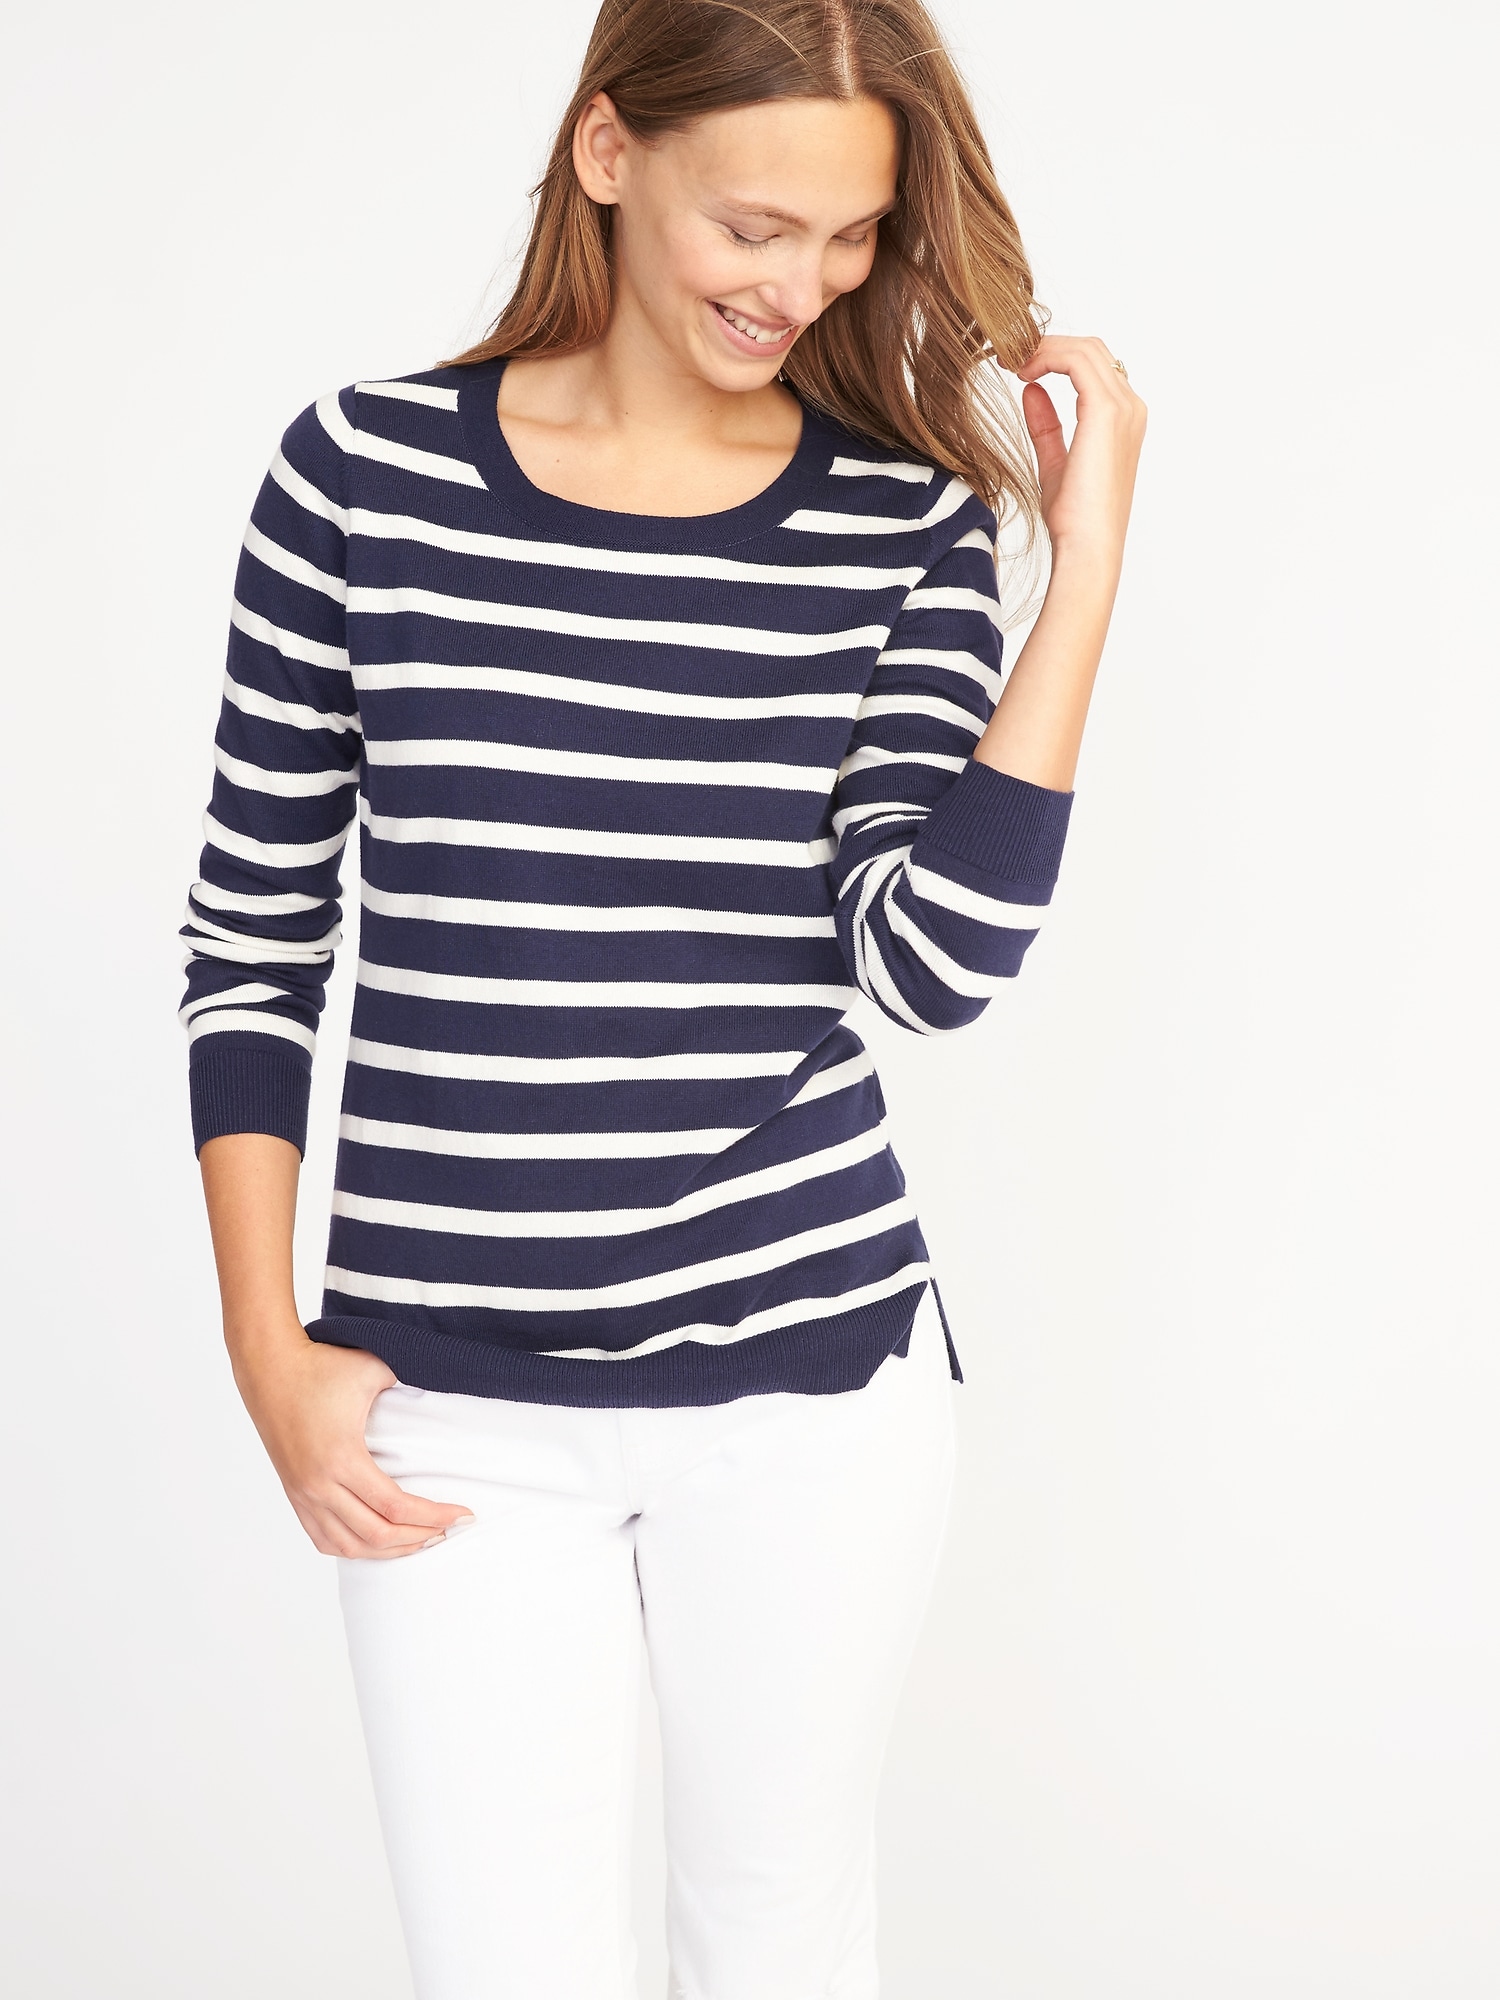 Classic Striped Sweater for Women | Old Navy